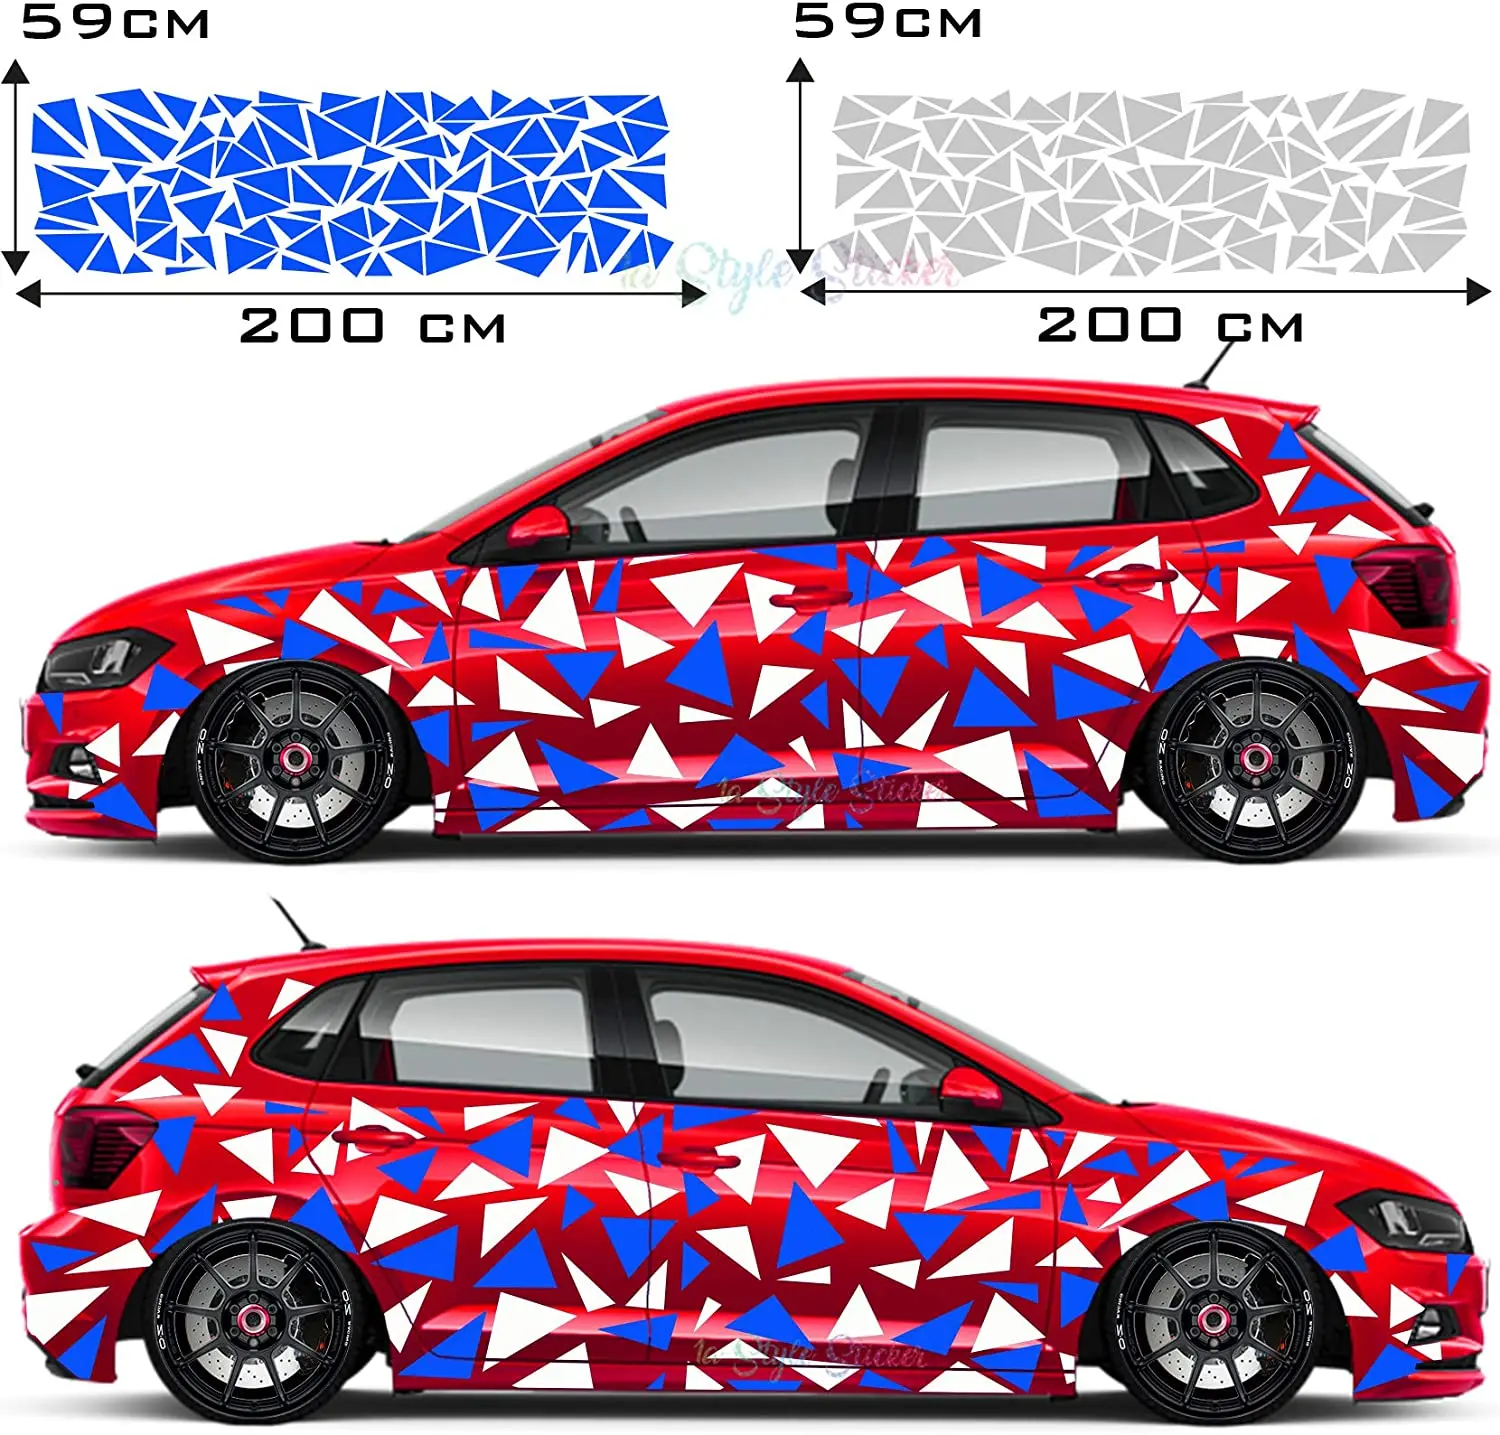 

Car Sticker Pointed Triangles Pattern Car Tattoo 2 Colors Camouflage Look Camo Sticker Pack of Camouflage Style Tuning